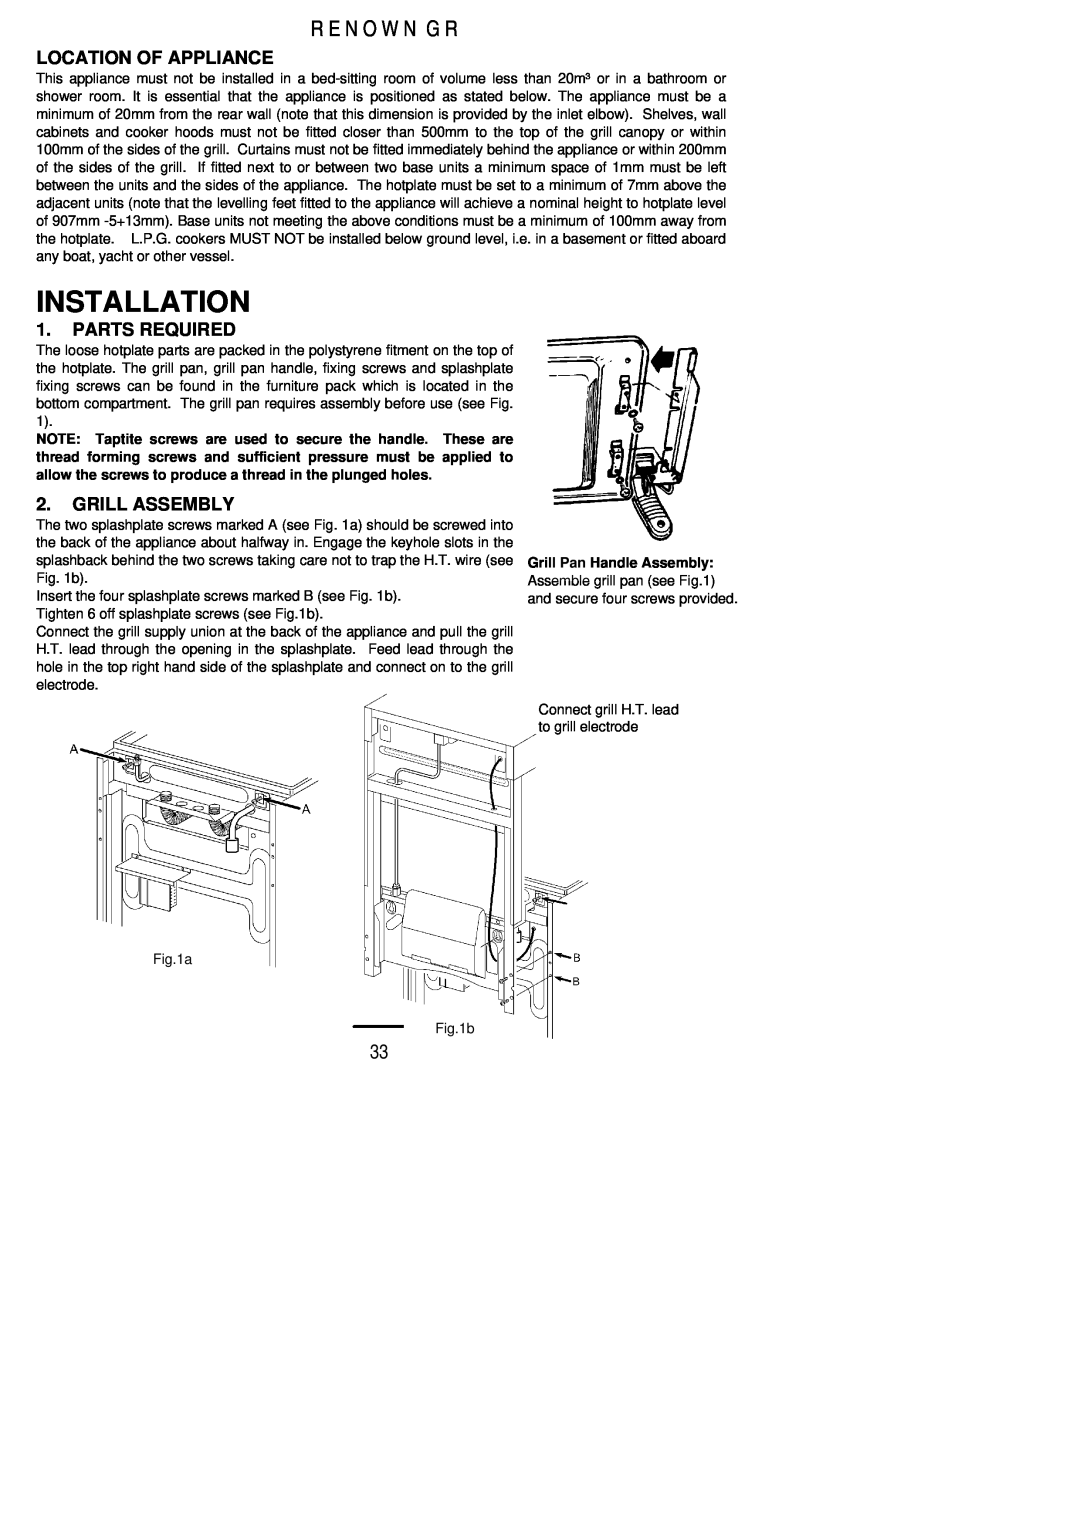 Parkinson Cowan Renown GR Installation, R E N O W N G R, Location Of Appliance, Parts Required, Grill Assembly 